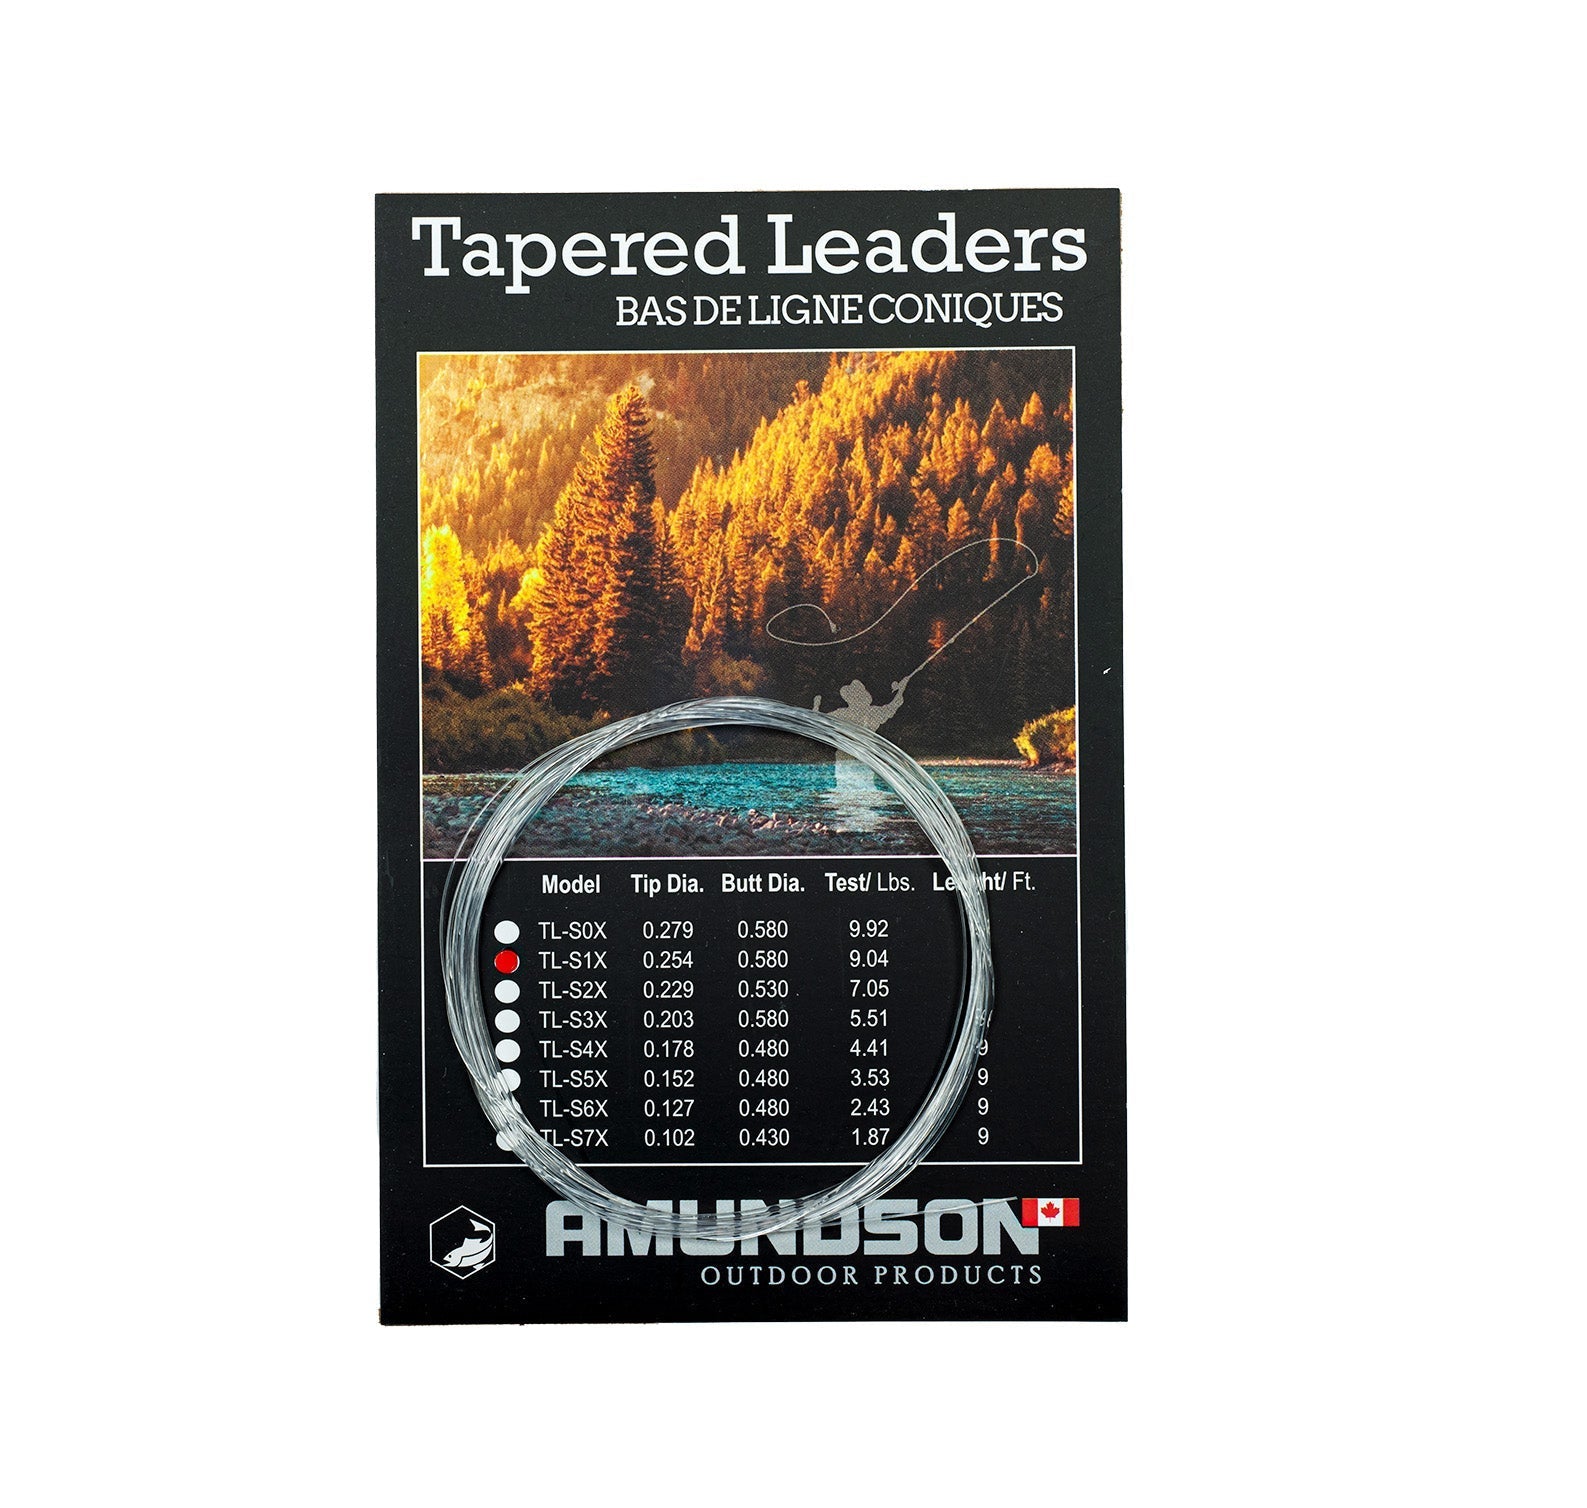 Tapered Leaders